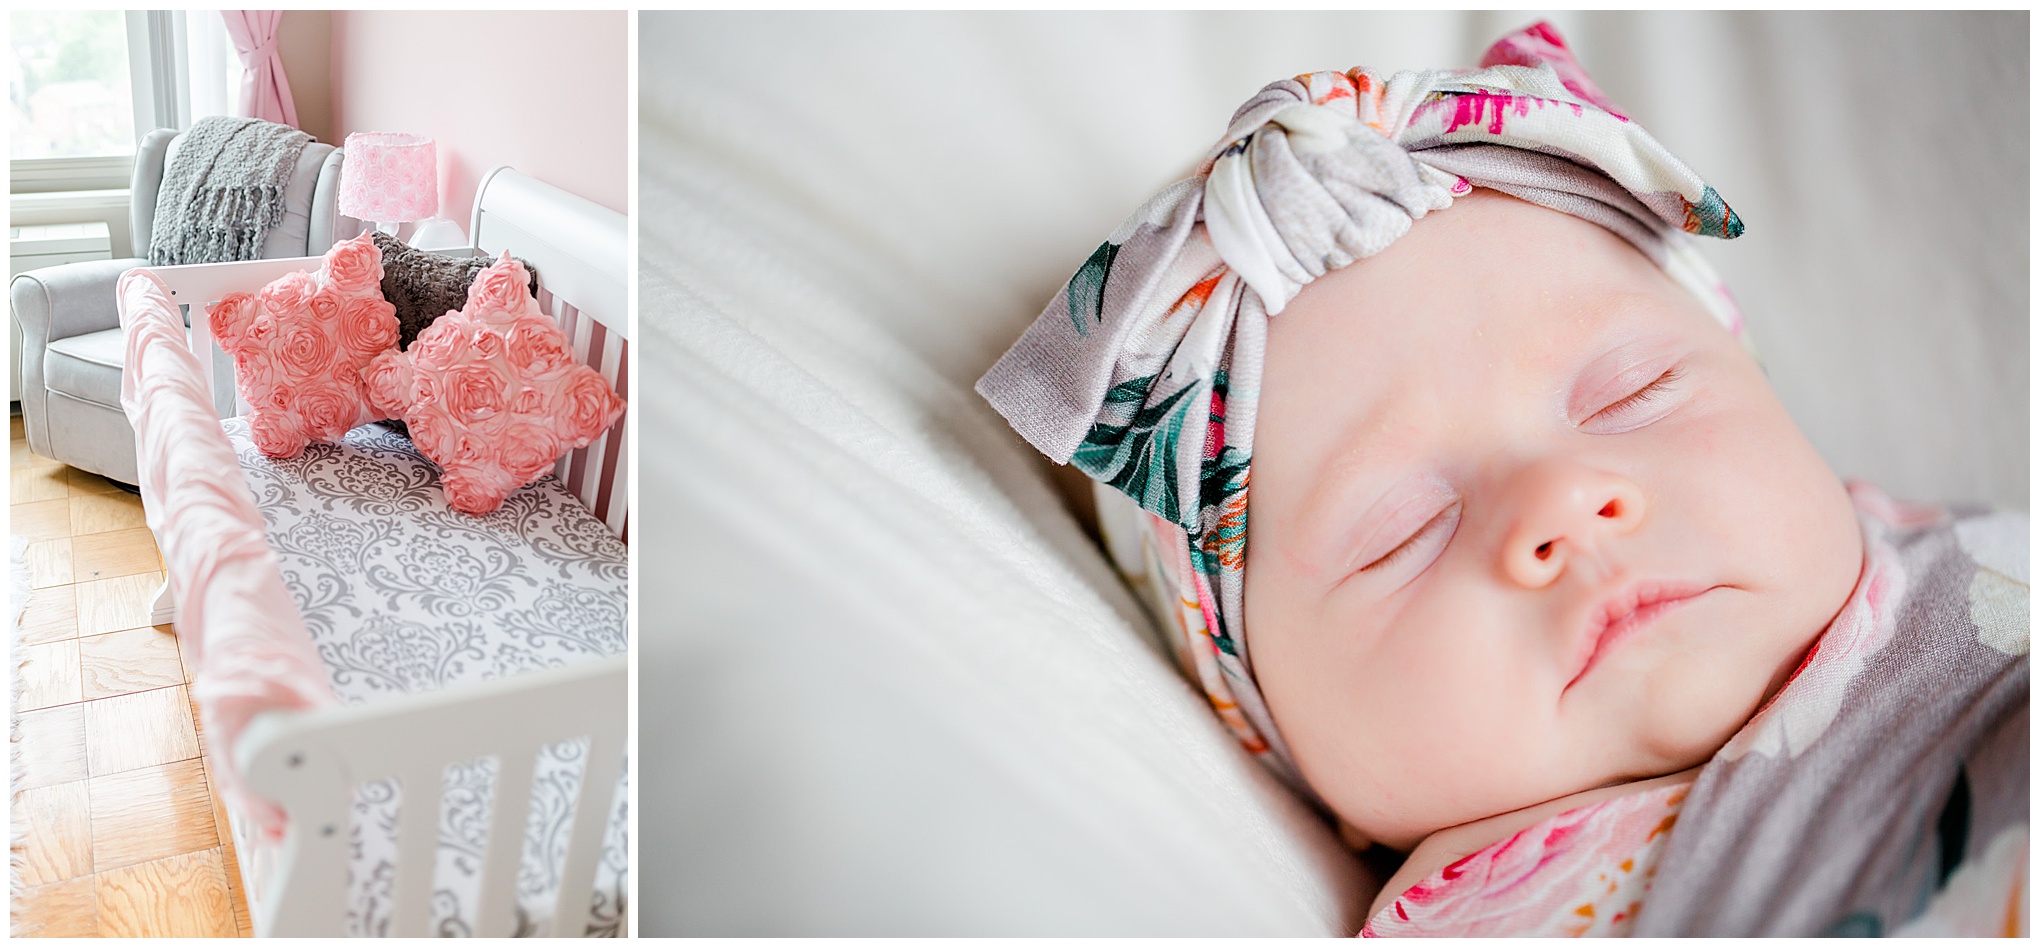 floral themed newborn photography, Arlington newborn photographer, Virginia newborn photography, Virginia newborn photographer, newborn photos, newborn photo ideas, floral themed newborn nursery, baby girl nursery, floral themed nursery, in-home newborn photography, in-home newborn photographer, in-home newborn photos, in-home newborn session, baby girl, lifestyle newborn photography, floral headband, floral swaddle